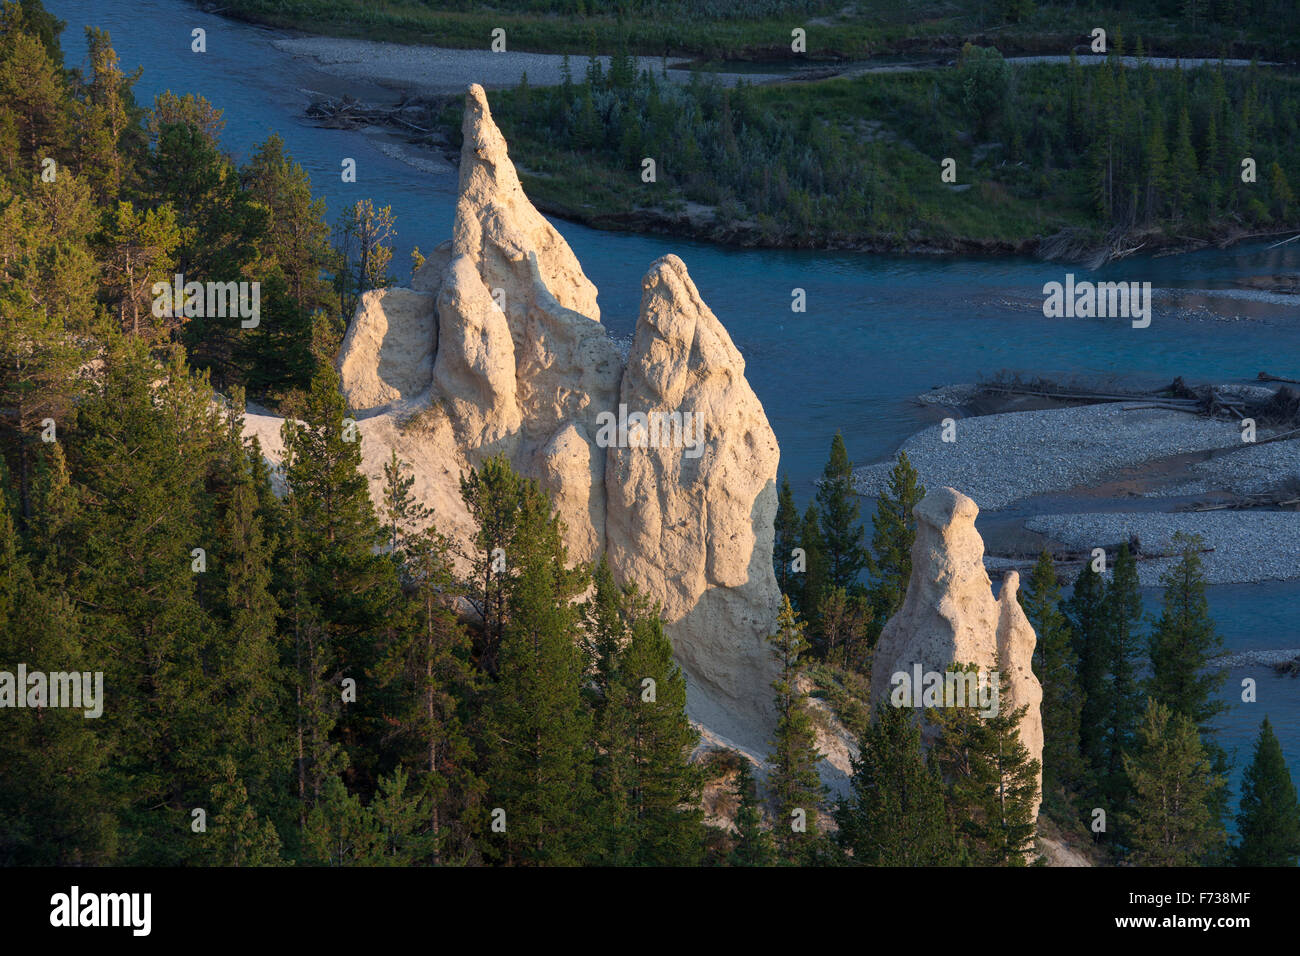 Earth pyramids / Hoodoos in the Bow Valley, Banff National Park, Alberta, Rocky Mountains, Canada Stock Photo